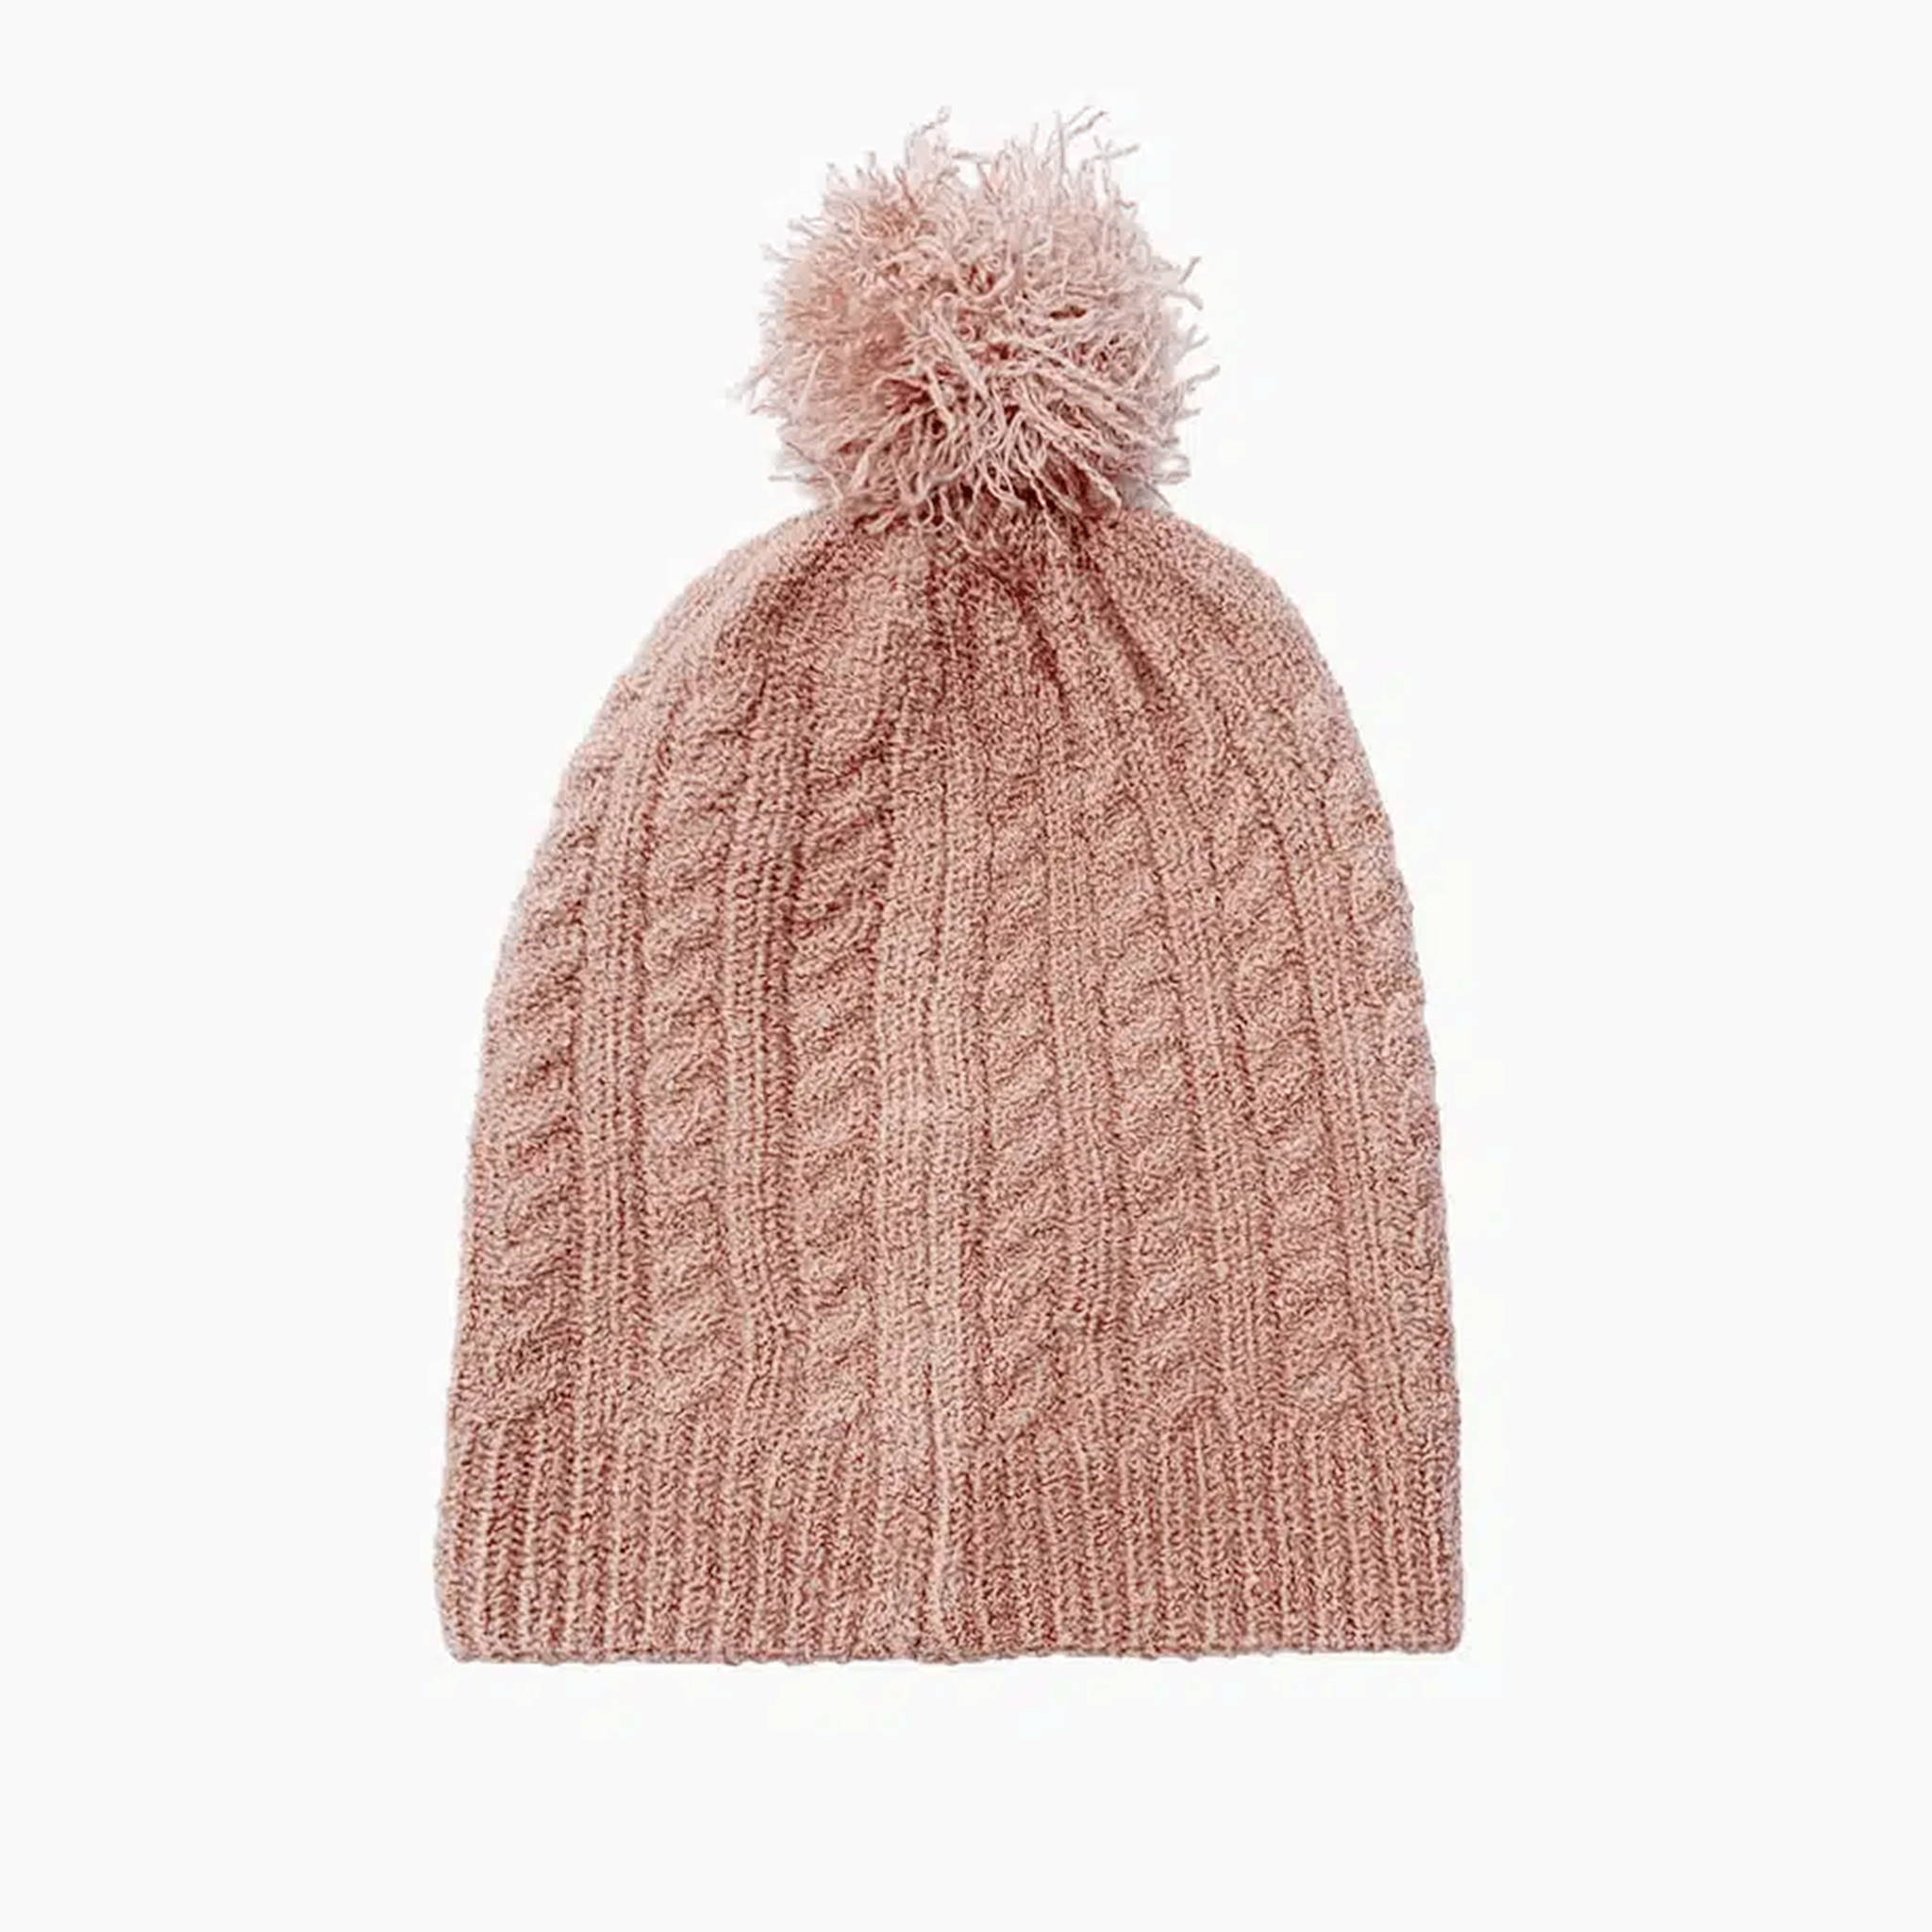 On a white background is a nude / pink knit beanie for dolls with a cable knit texture and a pom pom on top.